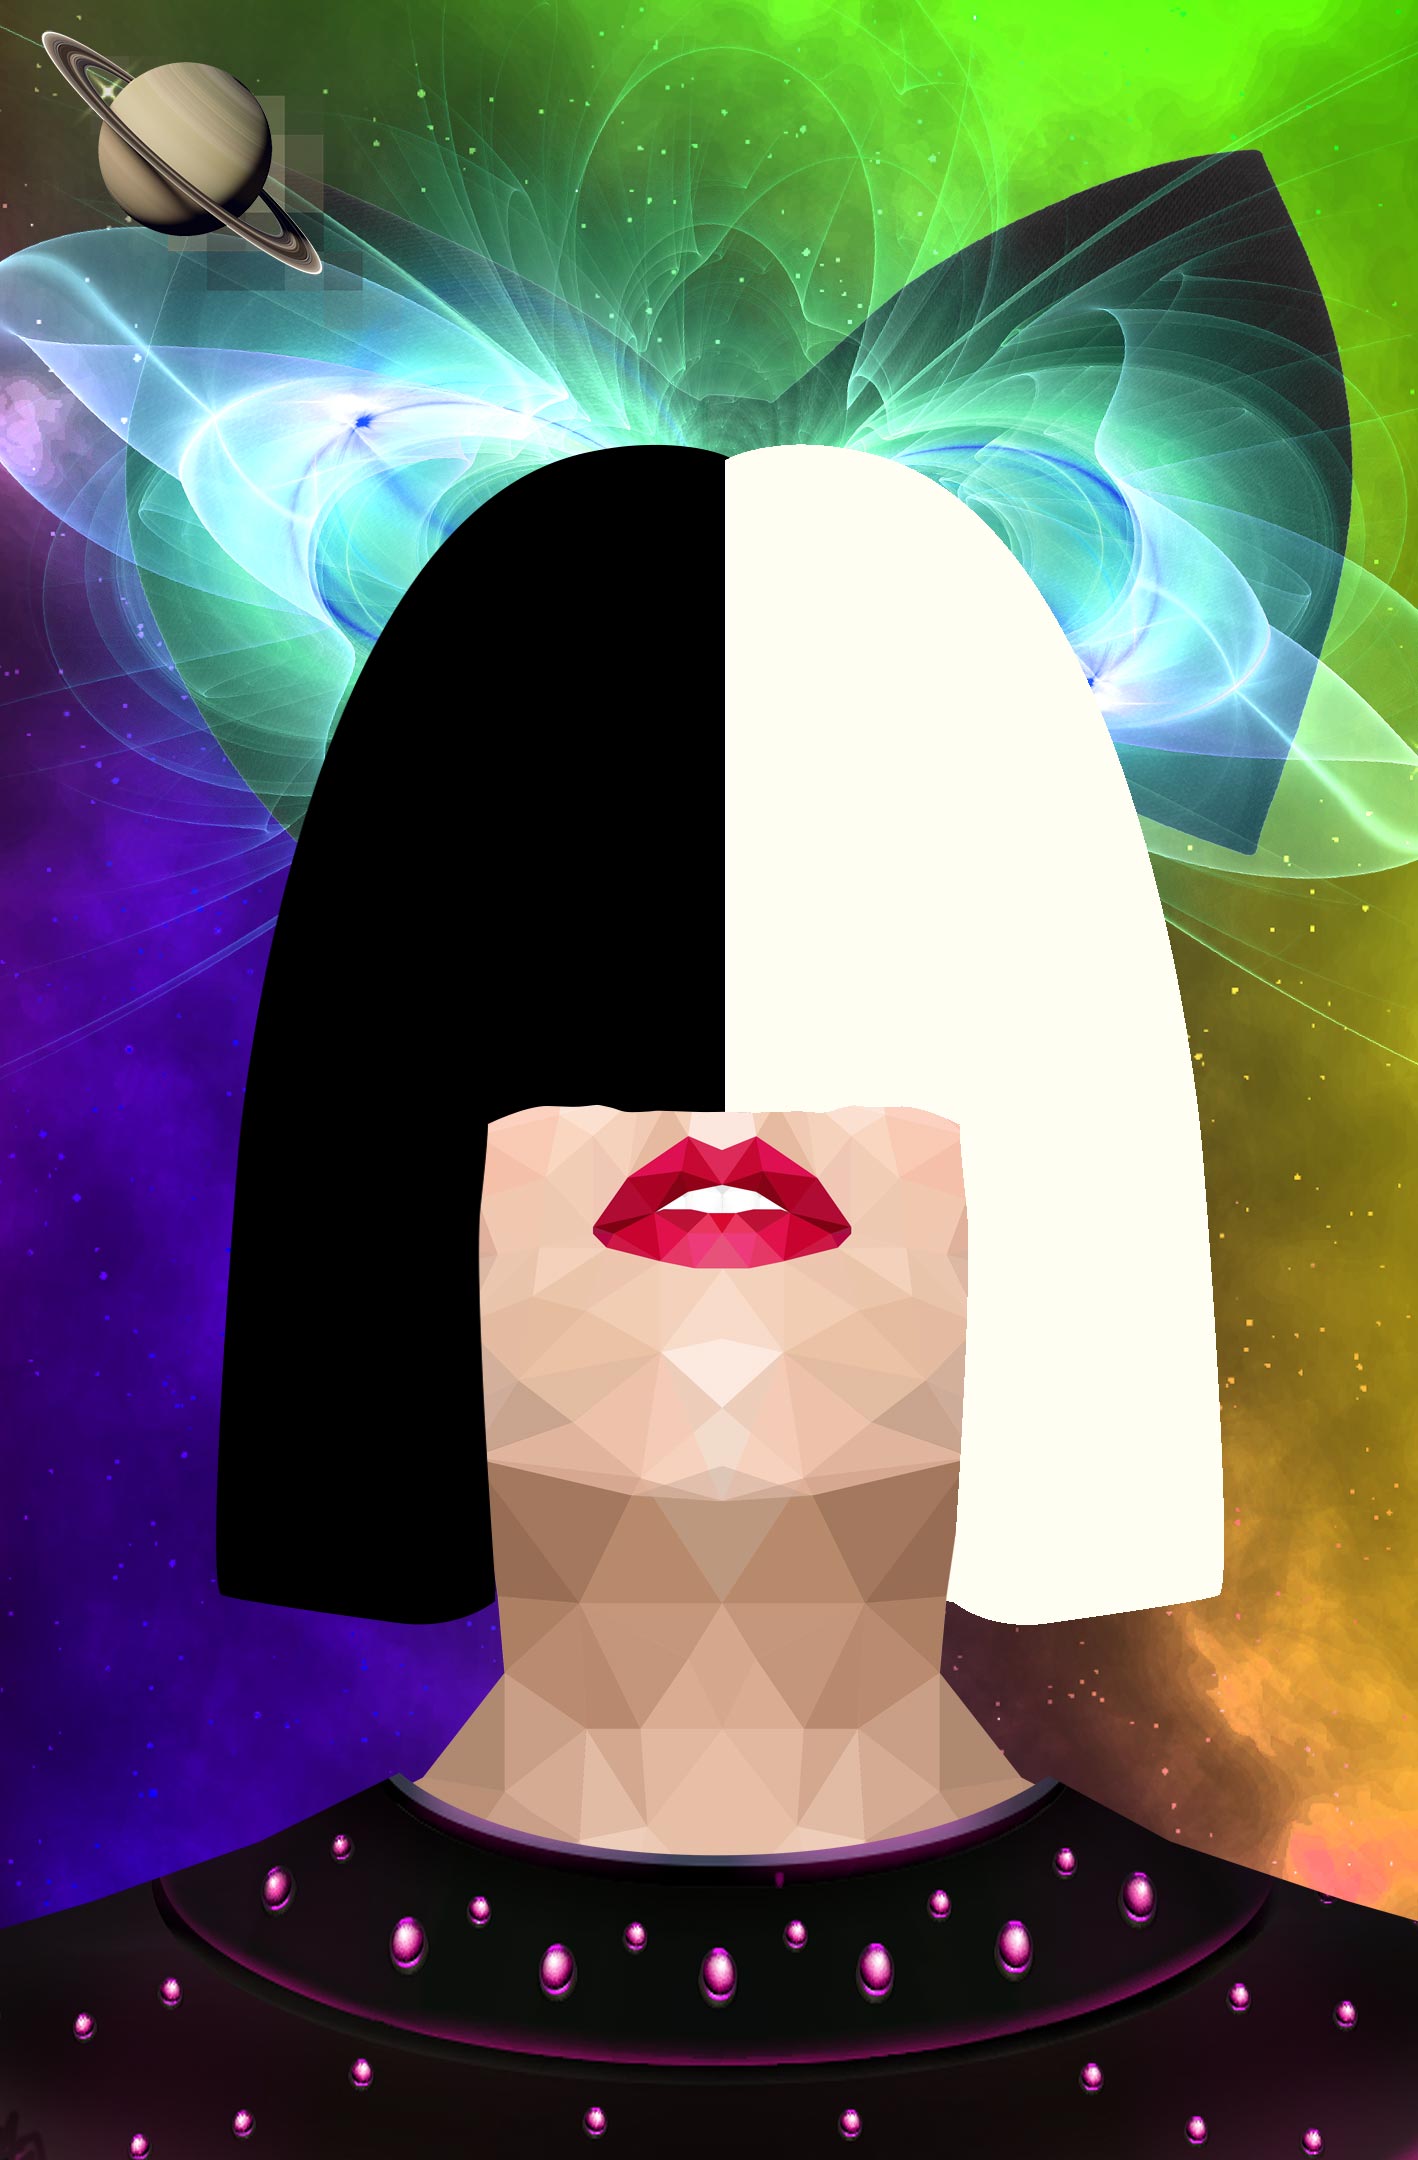 Homo Spacien #2 inspired by Sia